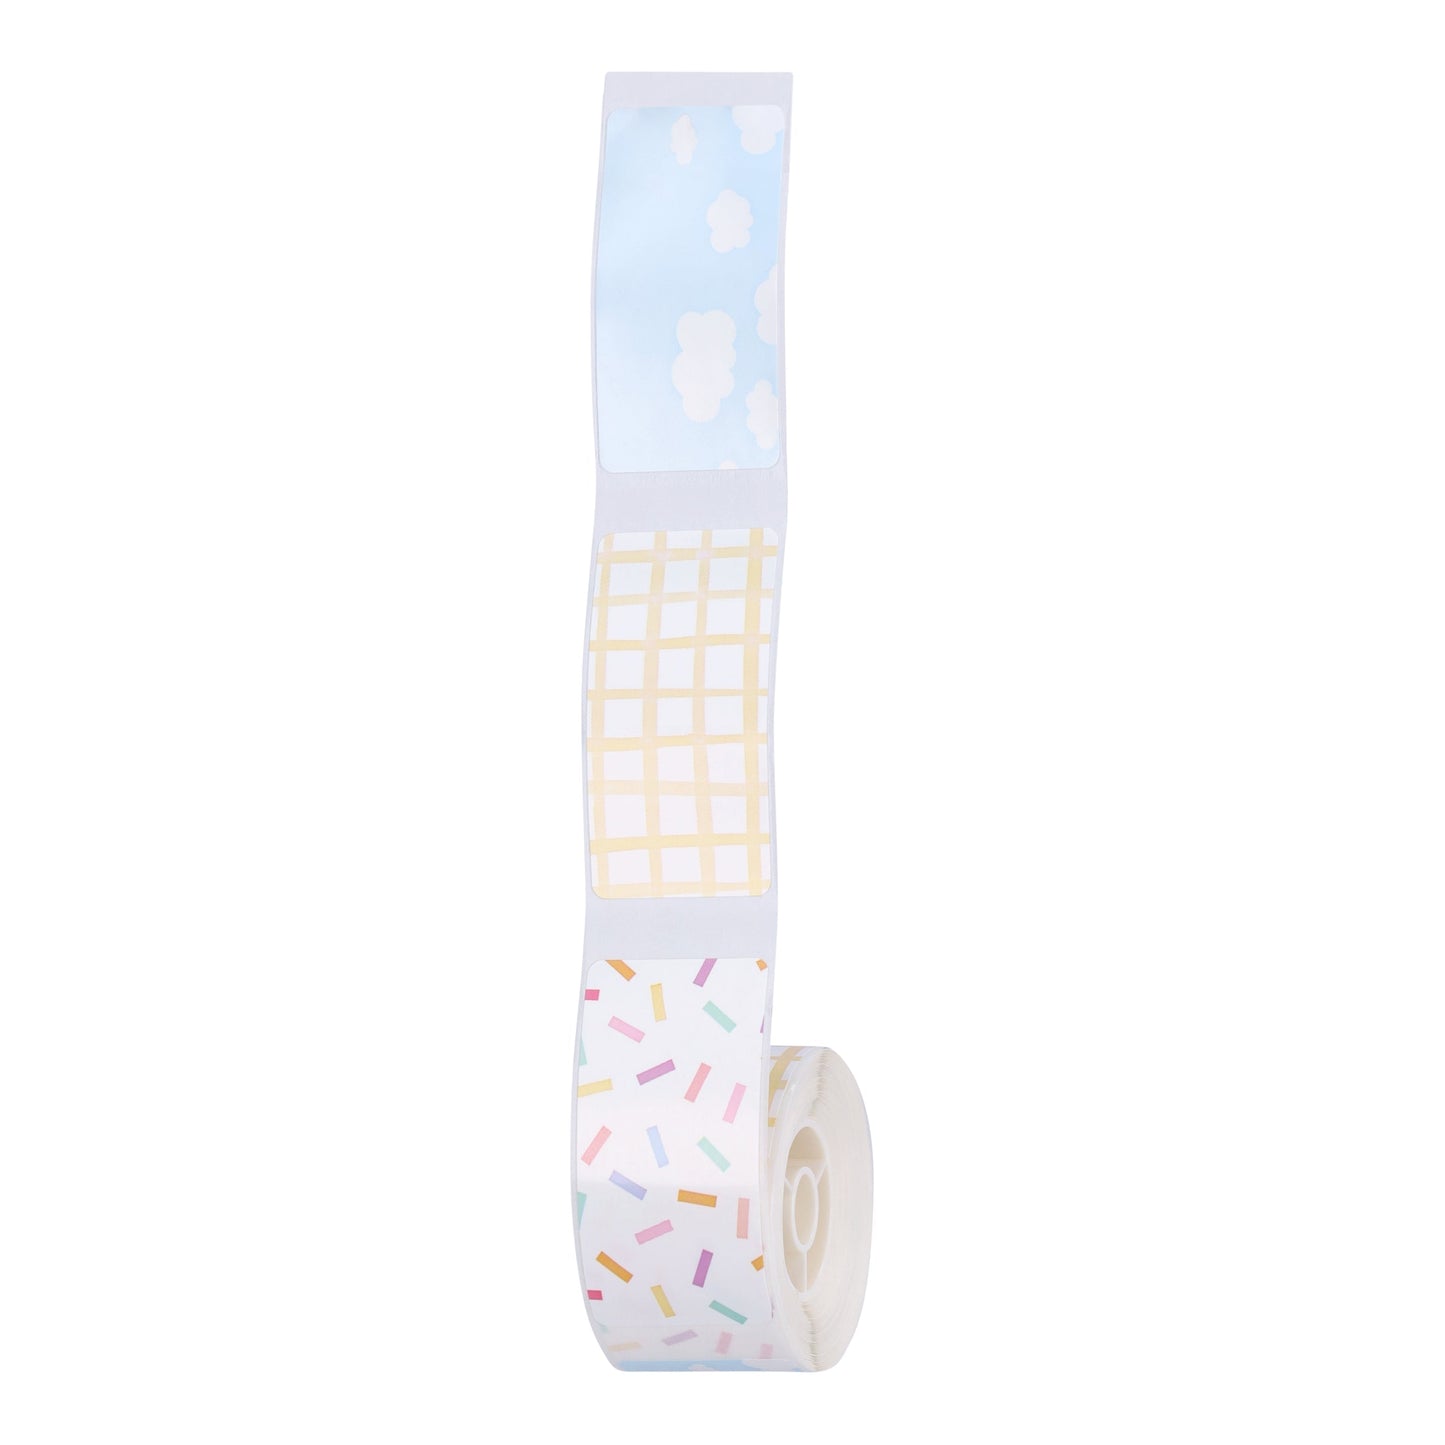 NIIMBOT - D101 ONLY - R25*50- 130 LABELS PER ROLL- MIXED PATTERN DESIGN